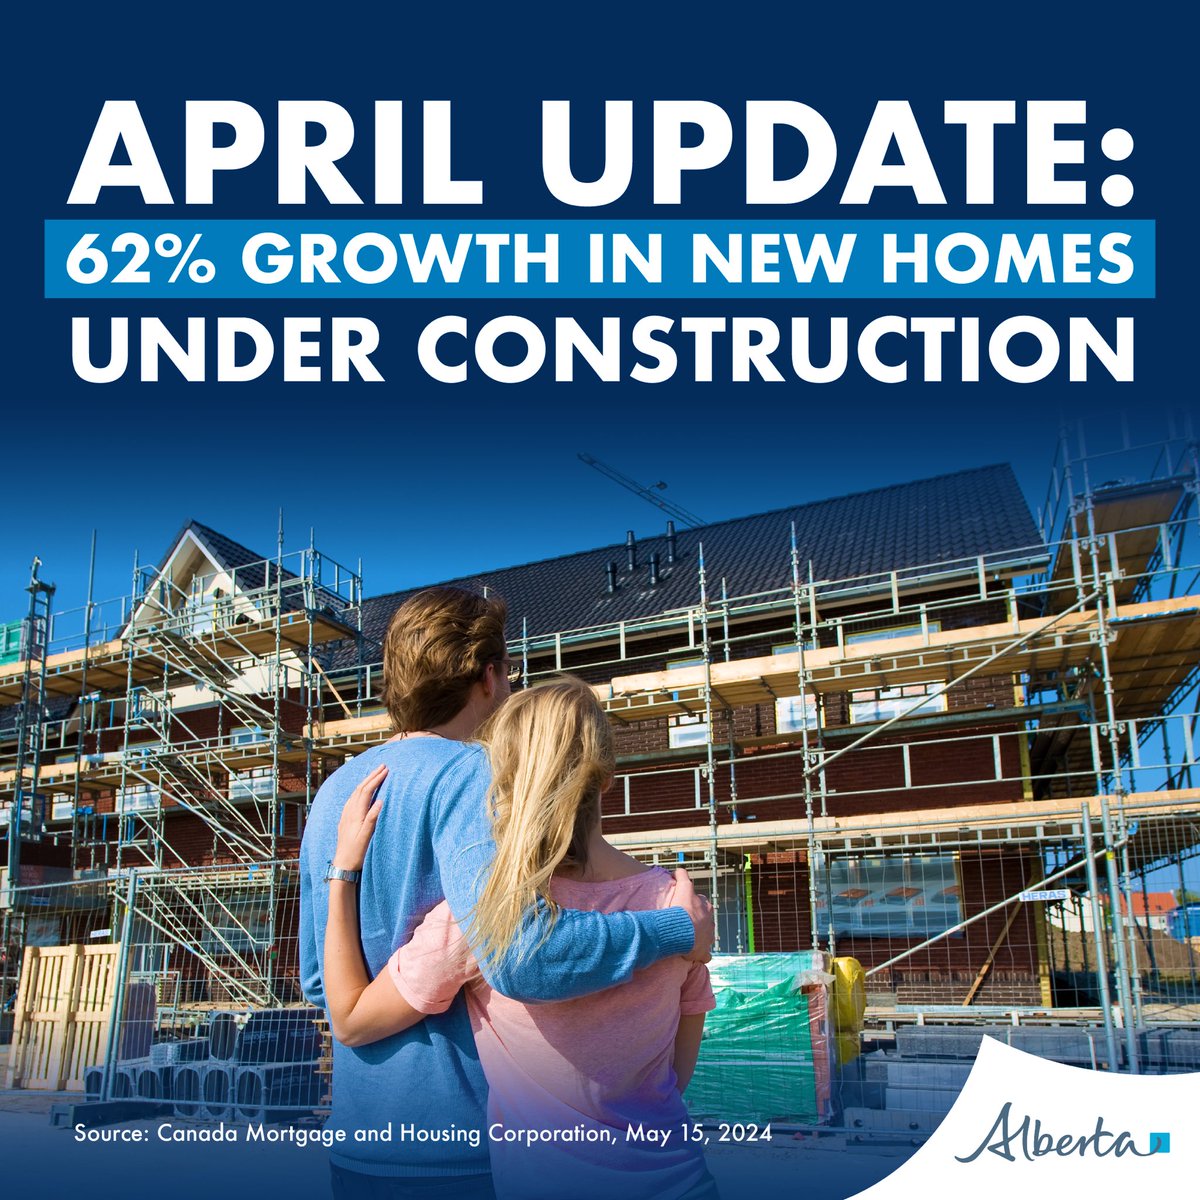 Alberta is setting a new record in housing starts! We’re seeing a 62% growth over April last year and a historic high of nearly 14, 000 new homes to date this year. Our plan is working, and we will keep working to turn these new starts into homes Albertans can move into.